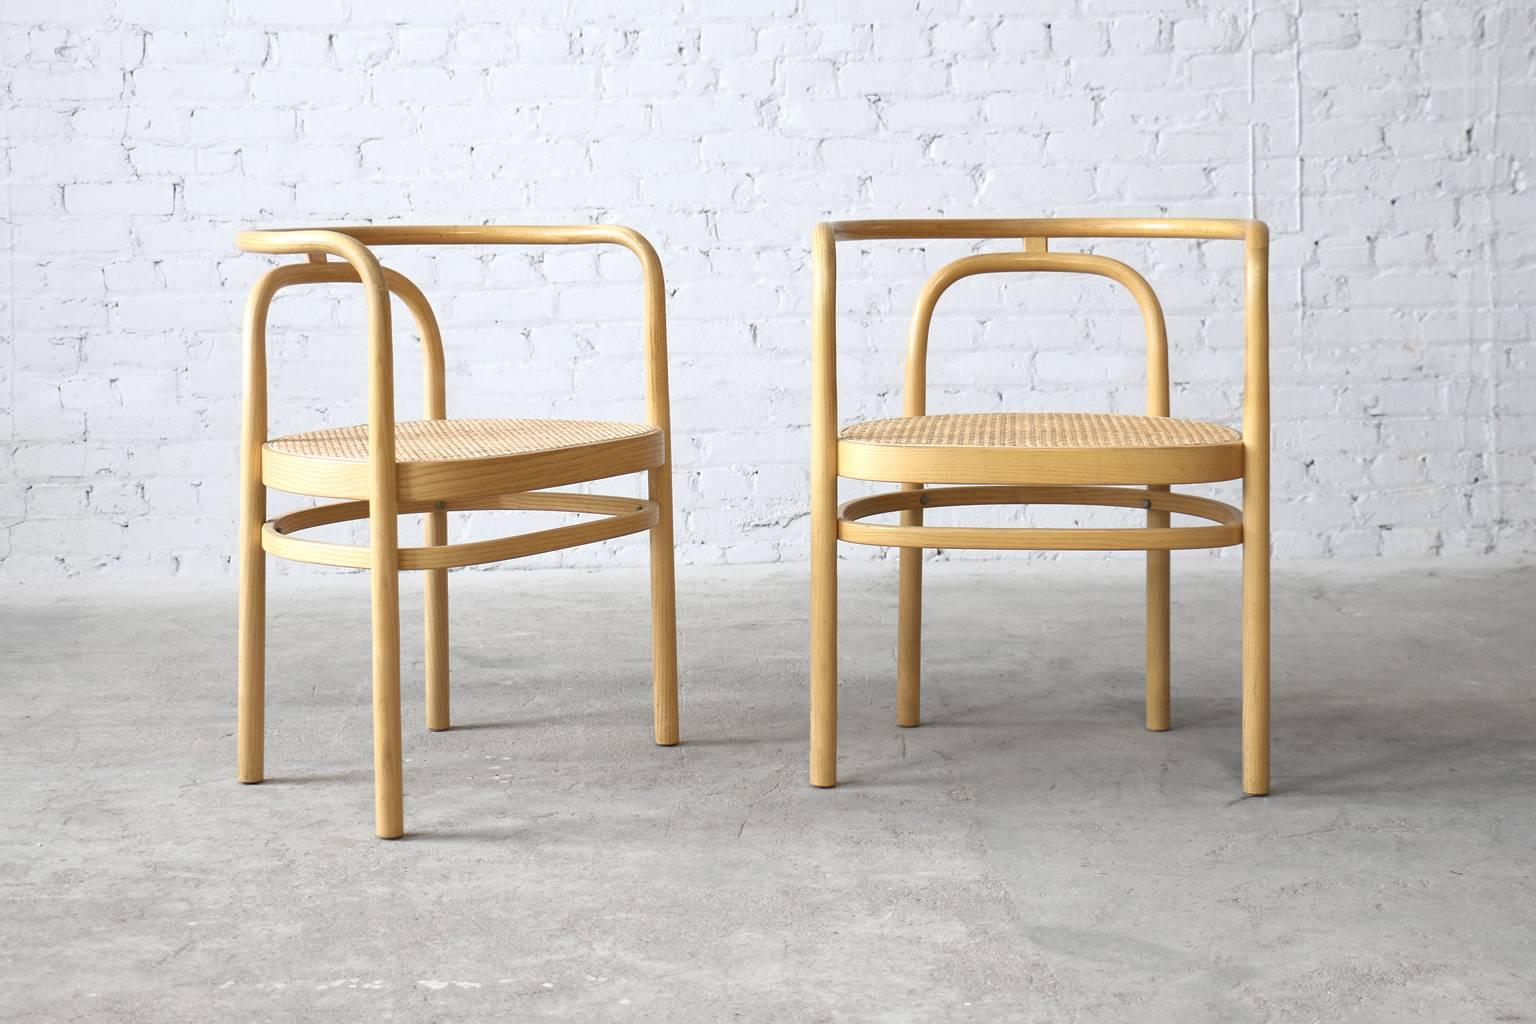 - model PK15
- designed in 1979
- steam-bent ash wood frame
- bamboo cane seat

A pair of bent ash wood armchairs by Poul Kjærholm for PP Møbler. One of Kjærholm's few wood chairs, it is based on the design of PK 12 steel chair. They work well